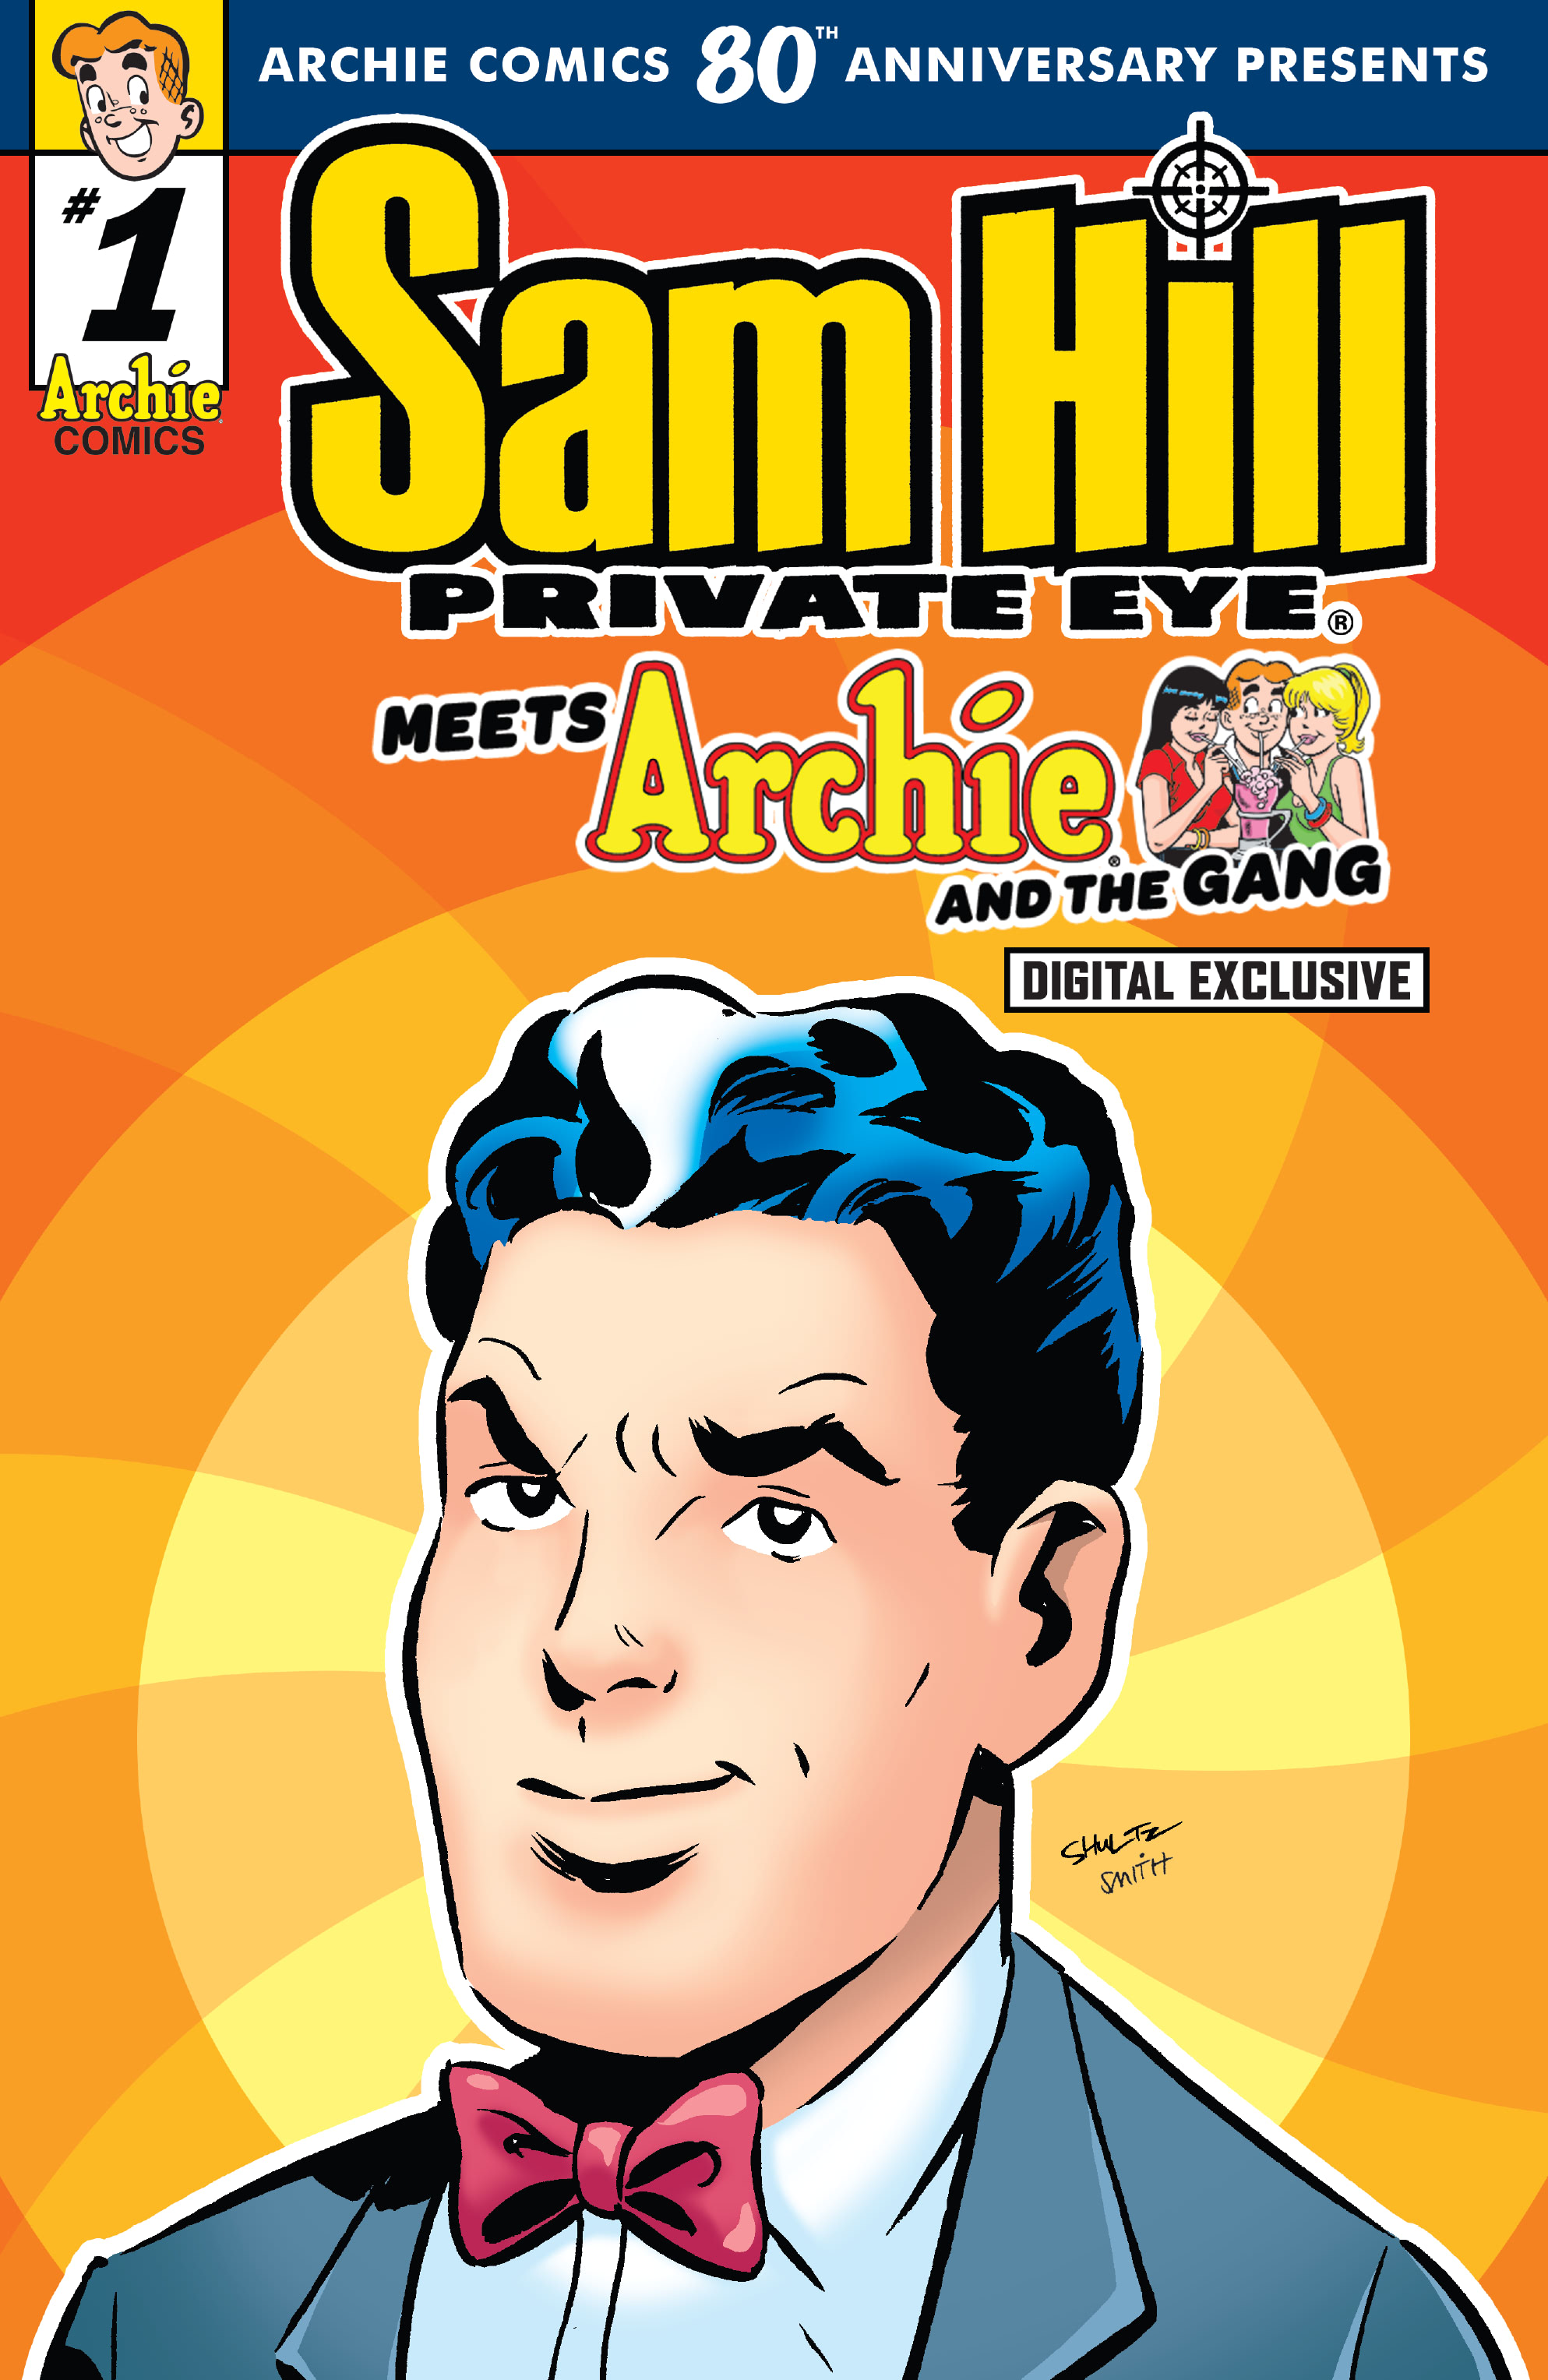 Read online Archie Comics 80th Anniversary Presents comic -  Issue #12 - 1